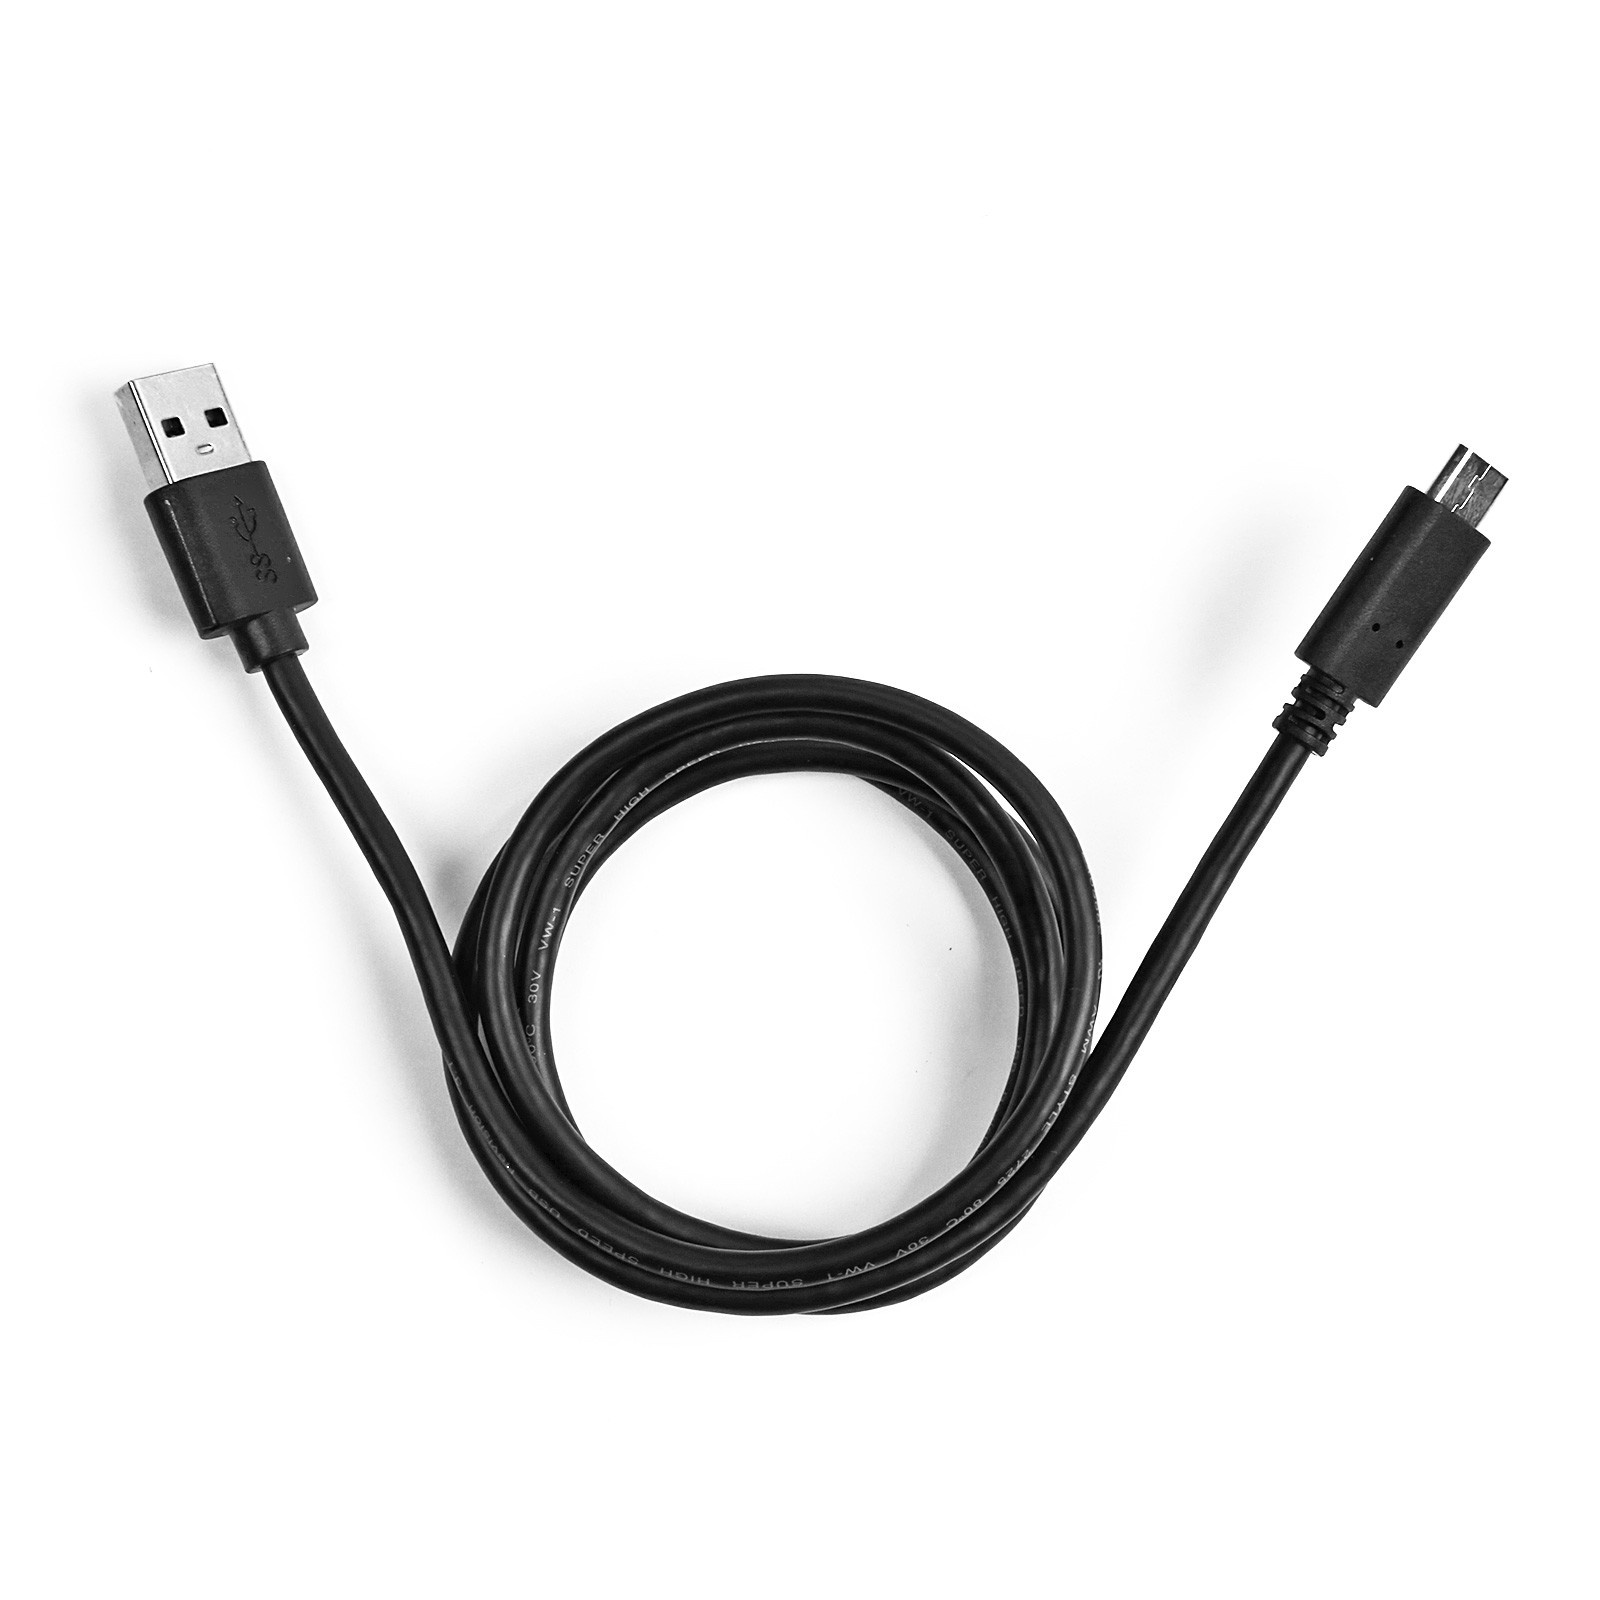 EKON USB 3.1 type C male to type C male cable Inserted with either side facing up, slight design.